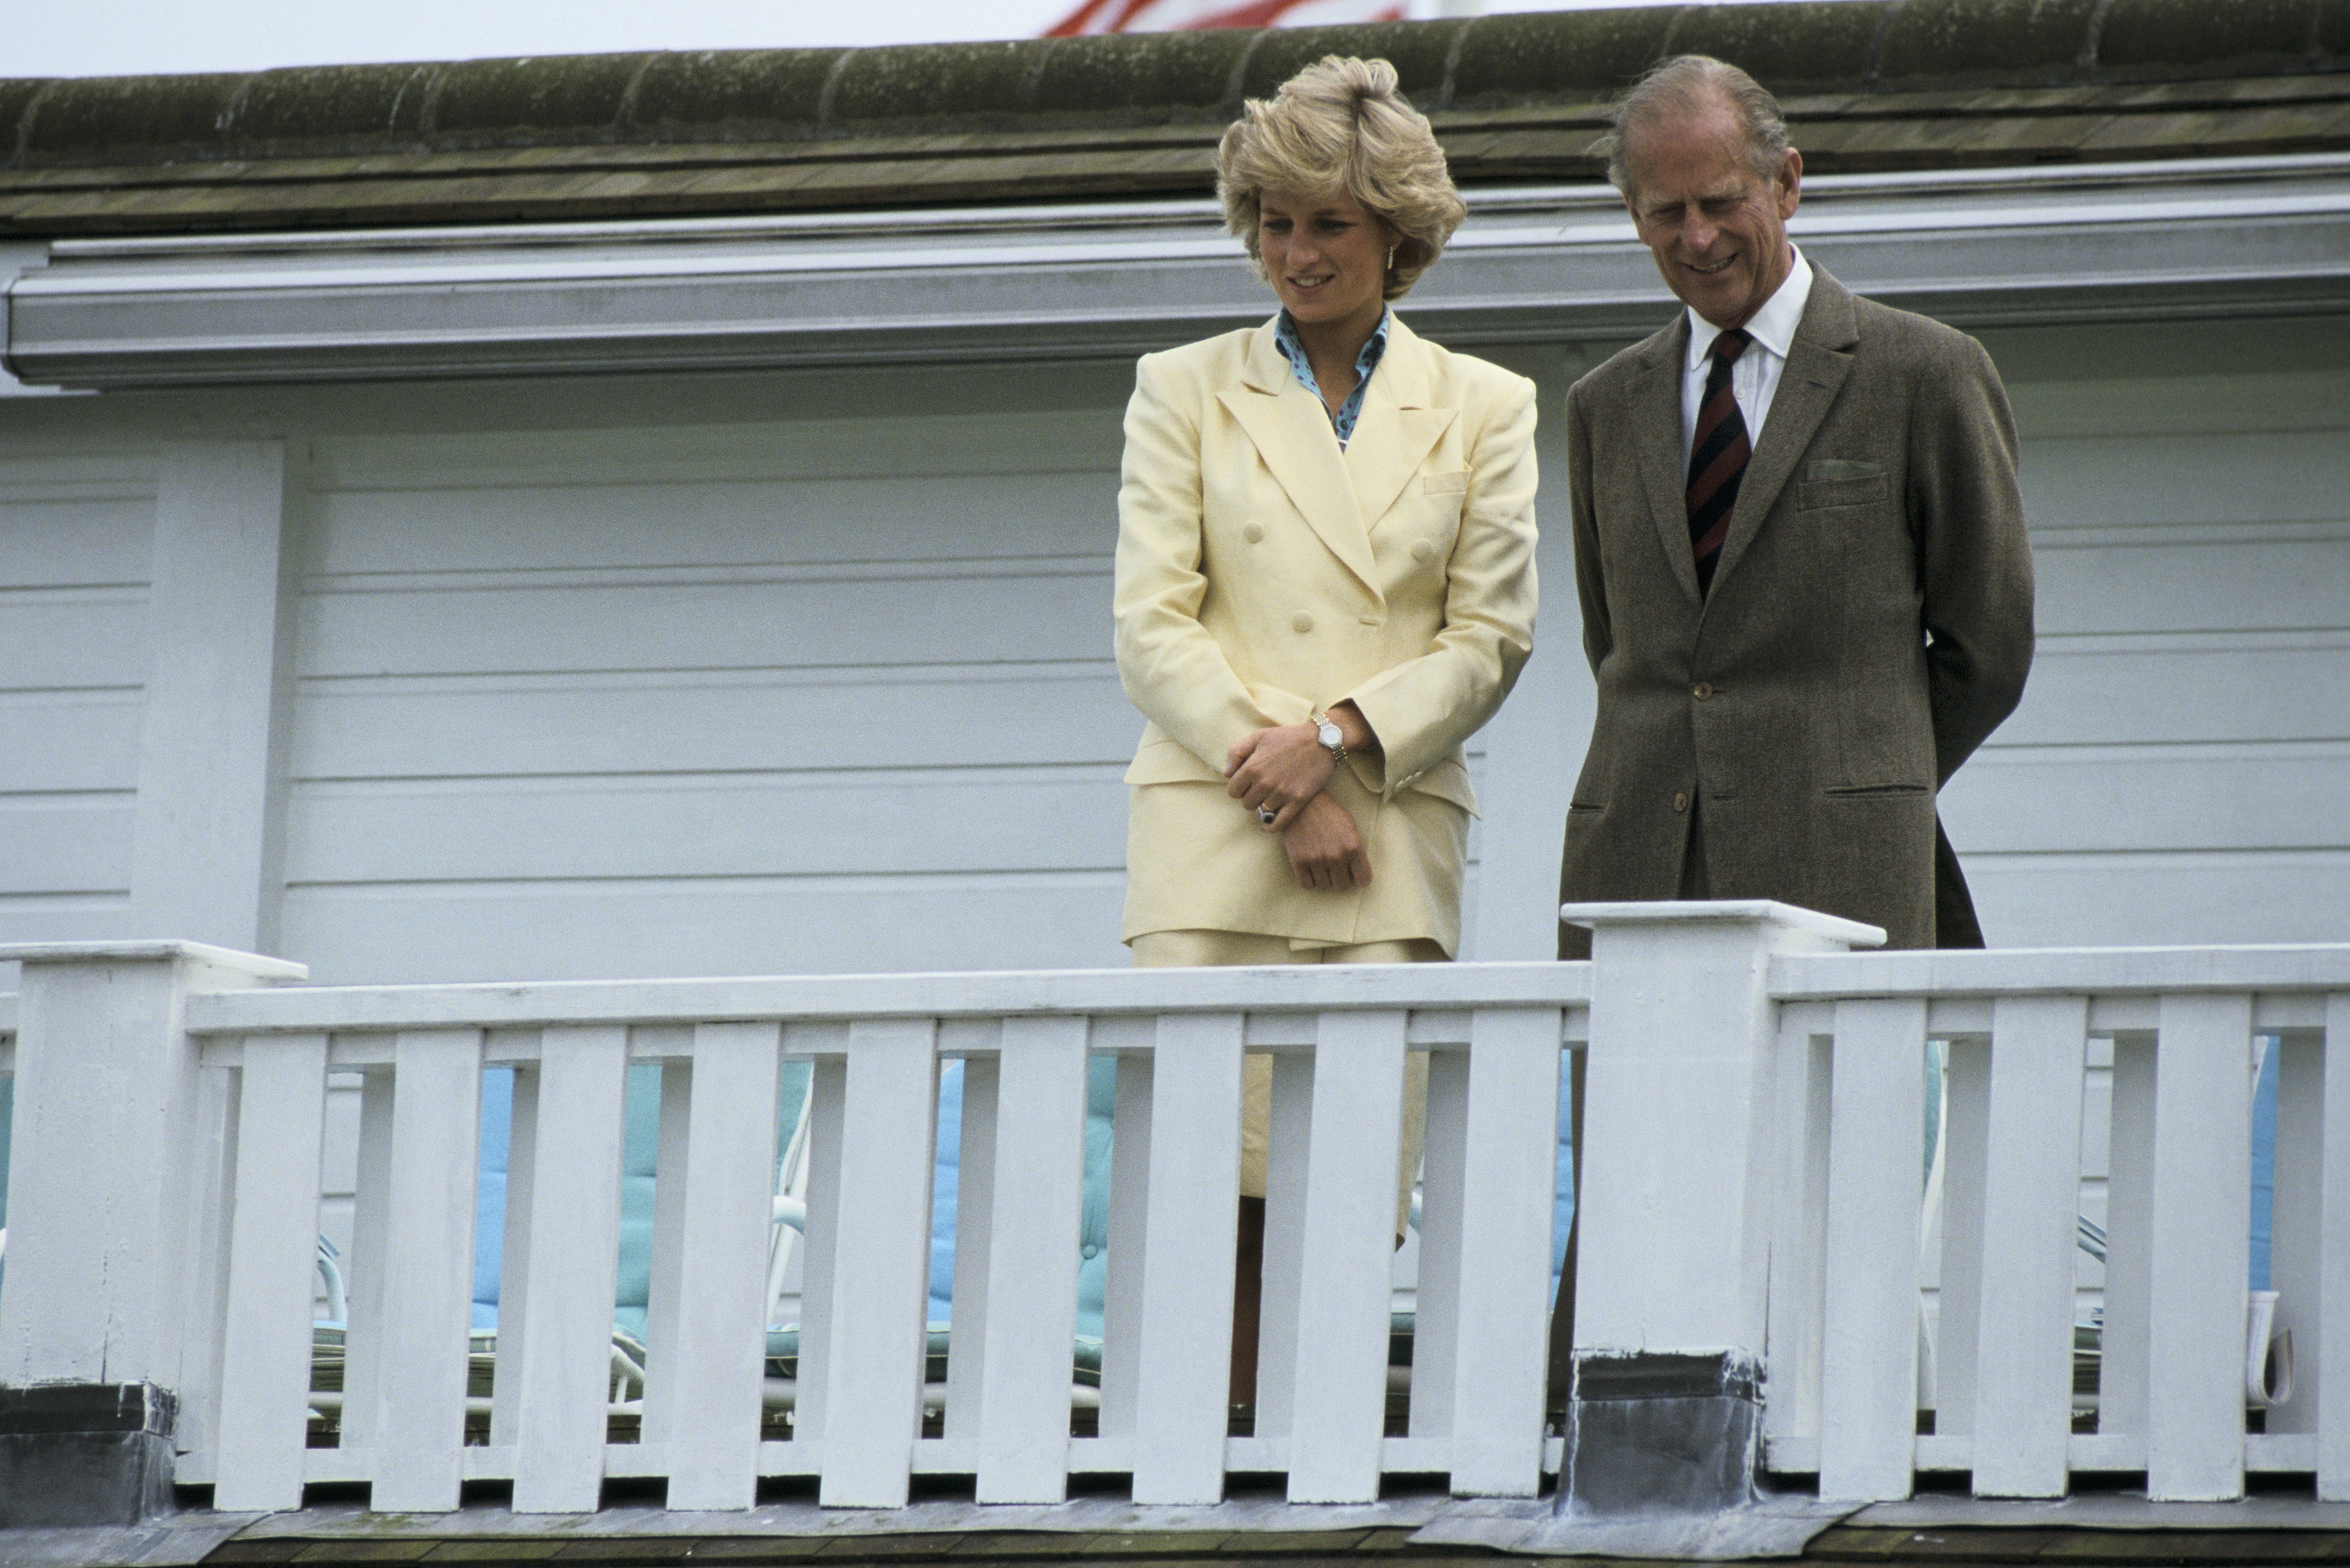 Princess Diana and Prince Philip in Windsor, United Kingdom on July 26,1987 | Photo: Getty Images